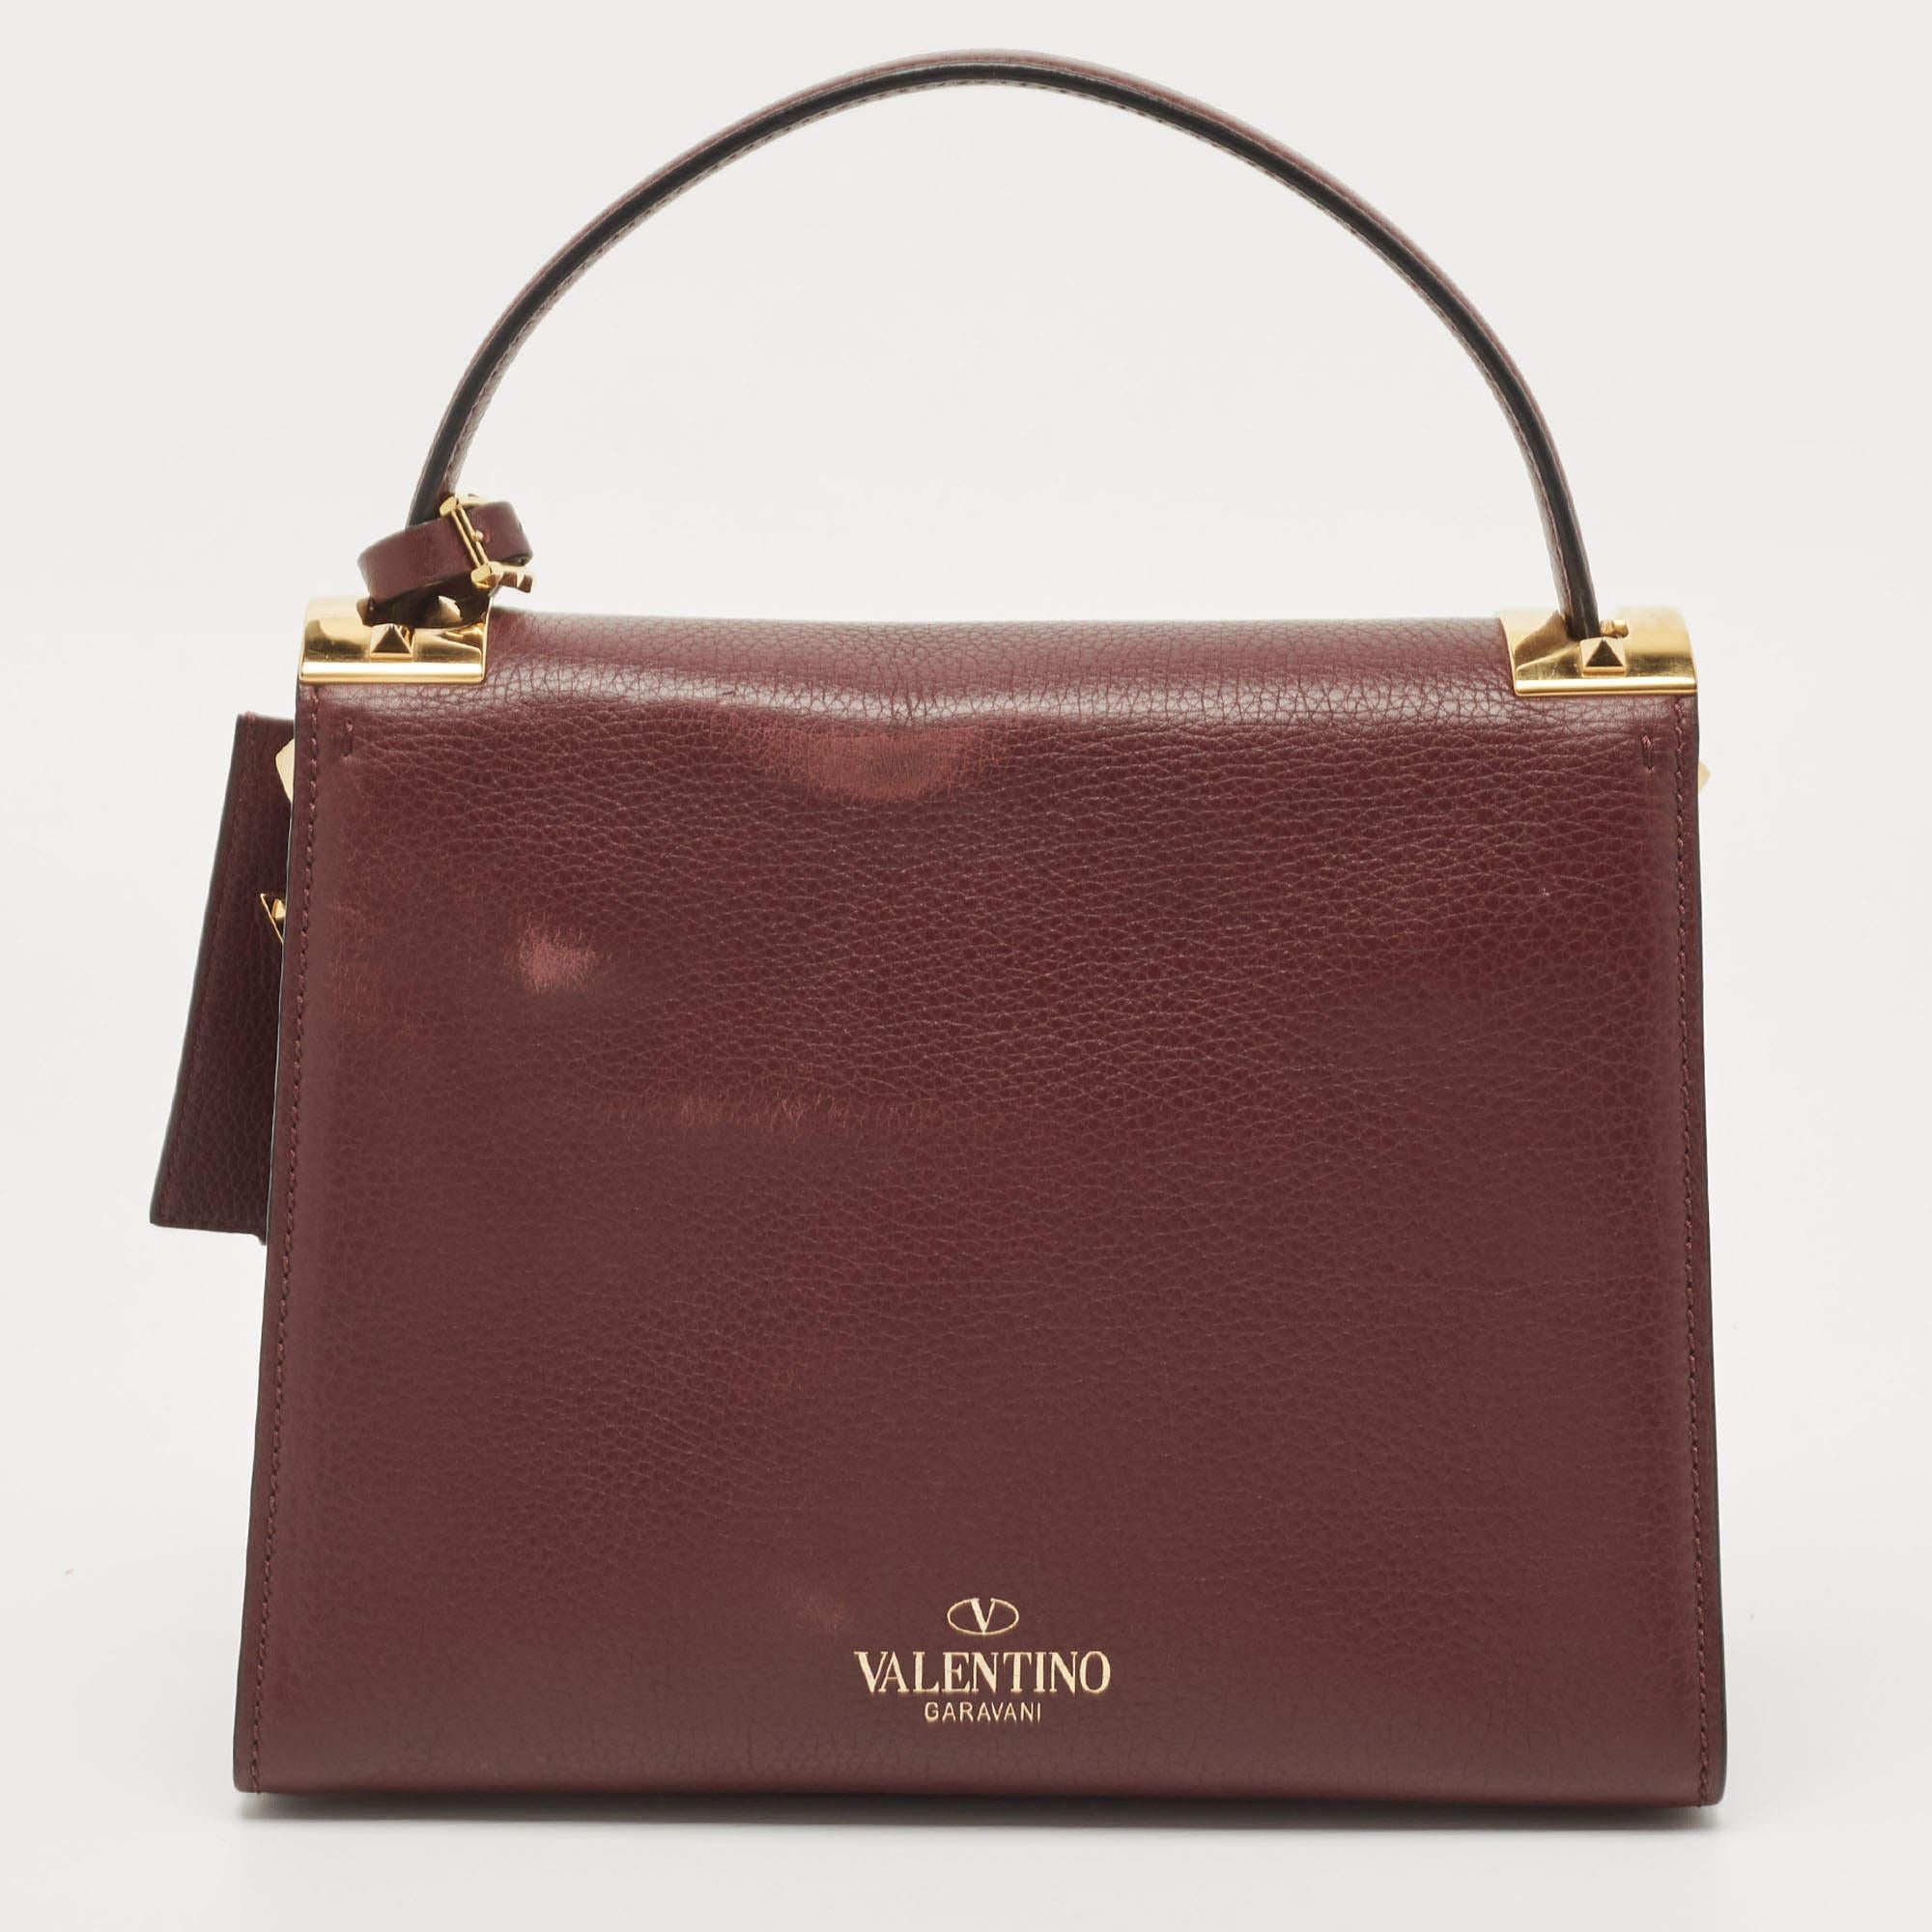 Marked by flawless craftsmanship and enduring appeal, this Valentino top handle bag is bound to be a versatile and durable accessory. It has a spacious size.

Includes: Original Dustbag, Info Booklet, Detachable Strap

